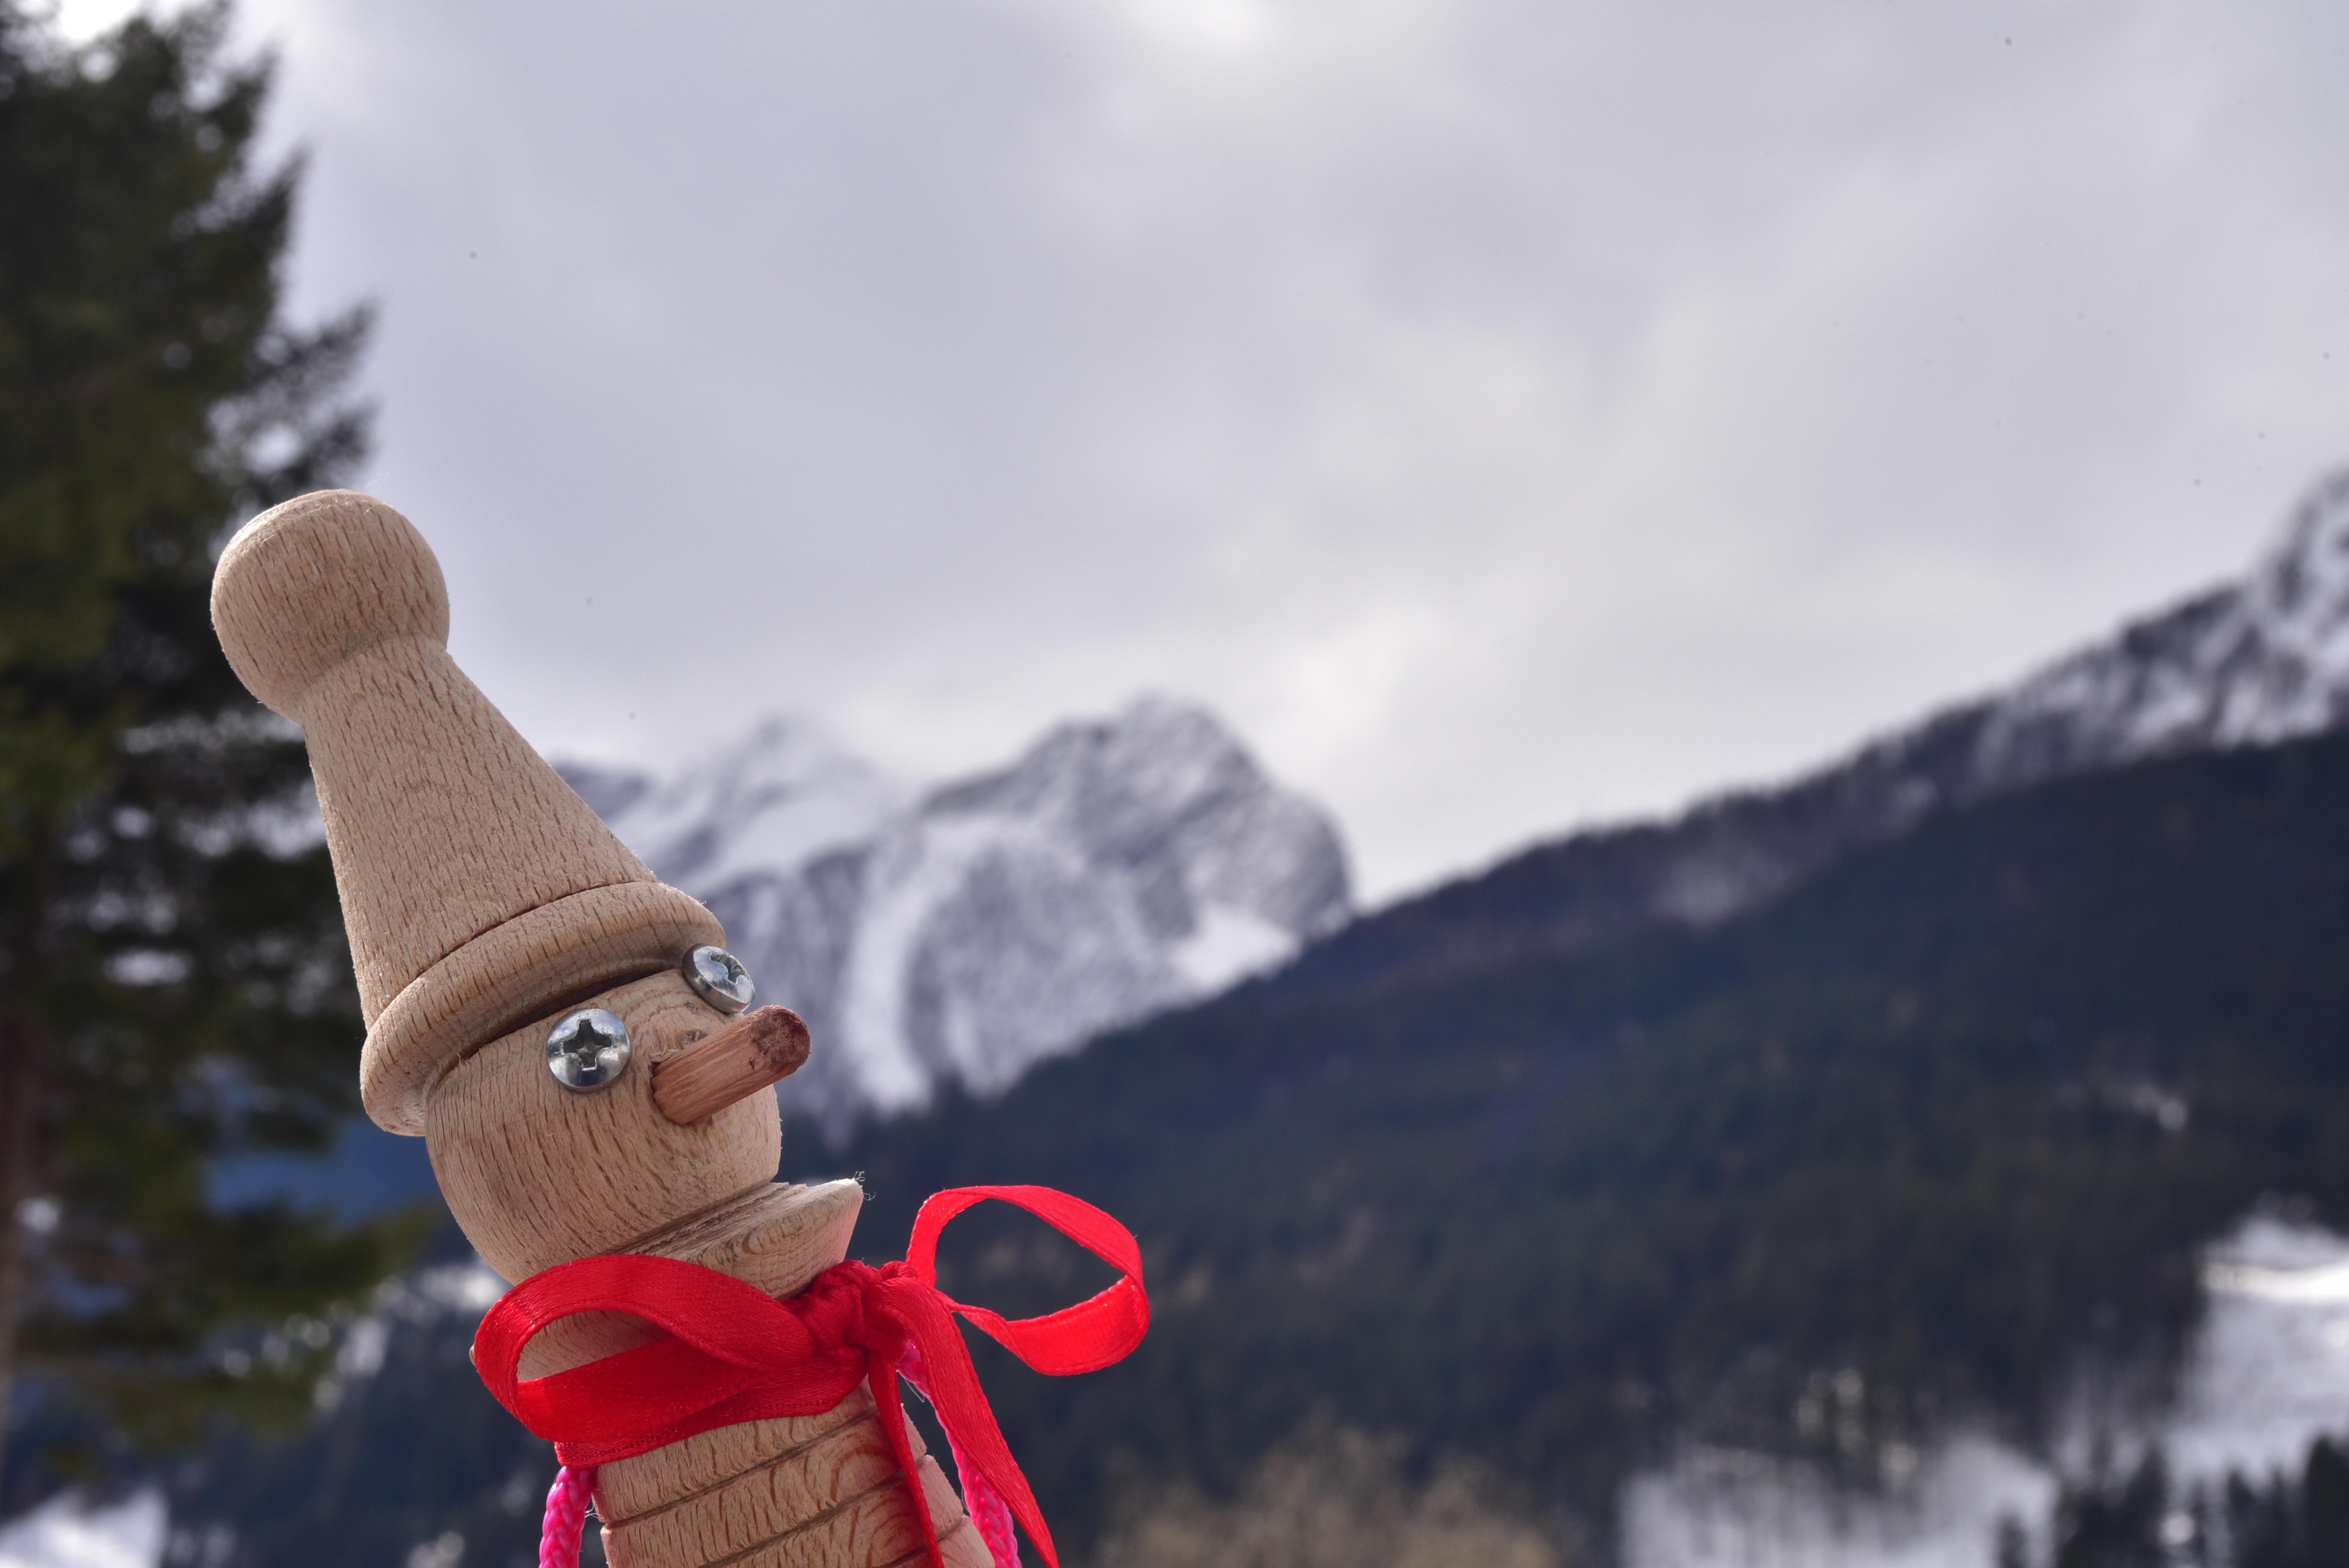 brown wooden character figurine with white snow cop in background